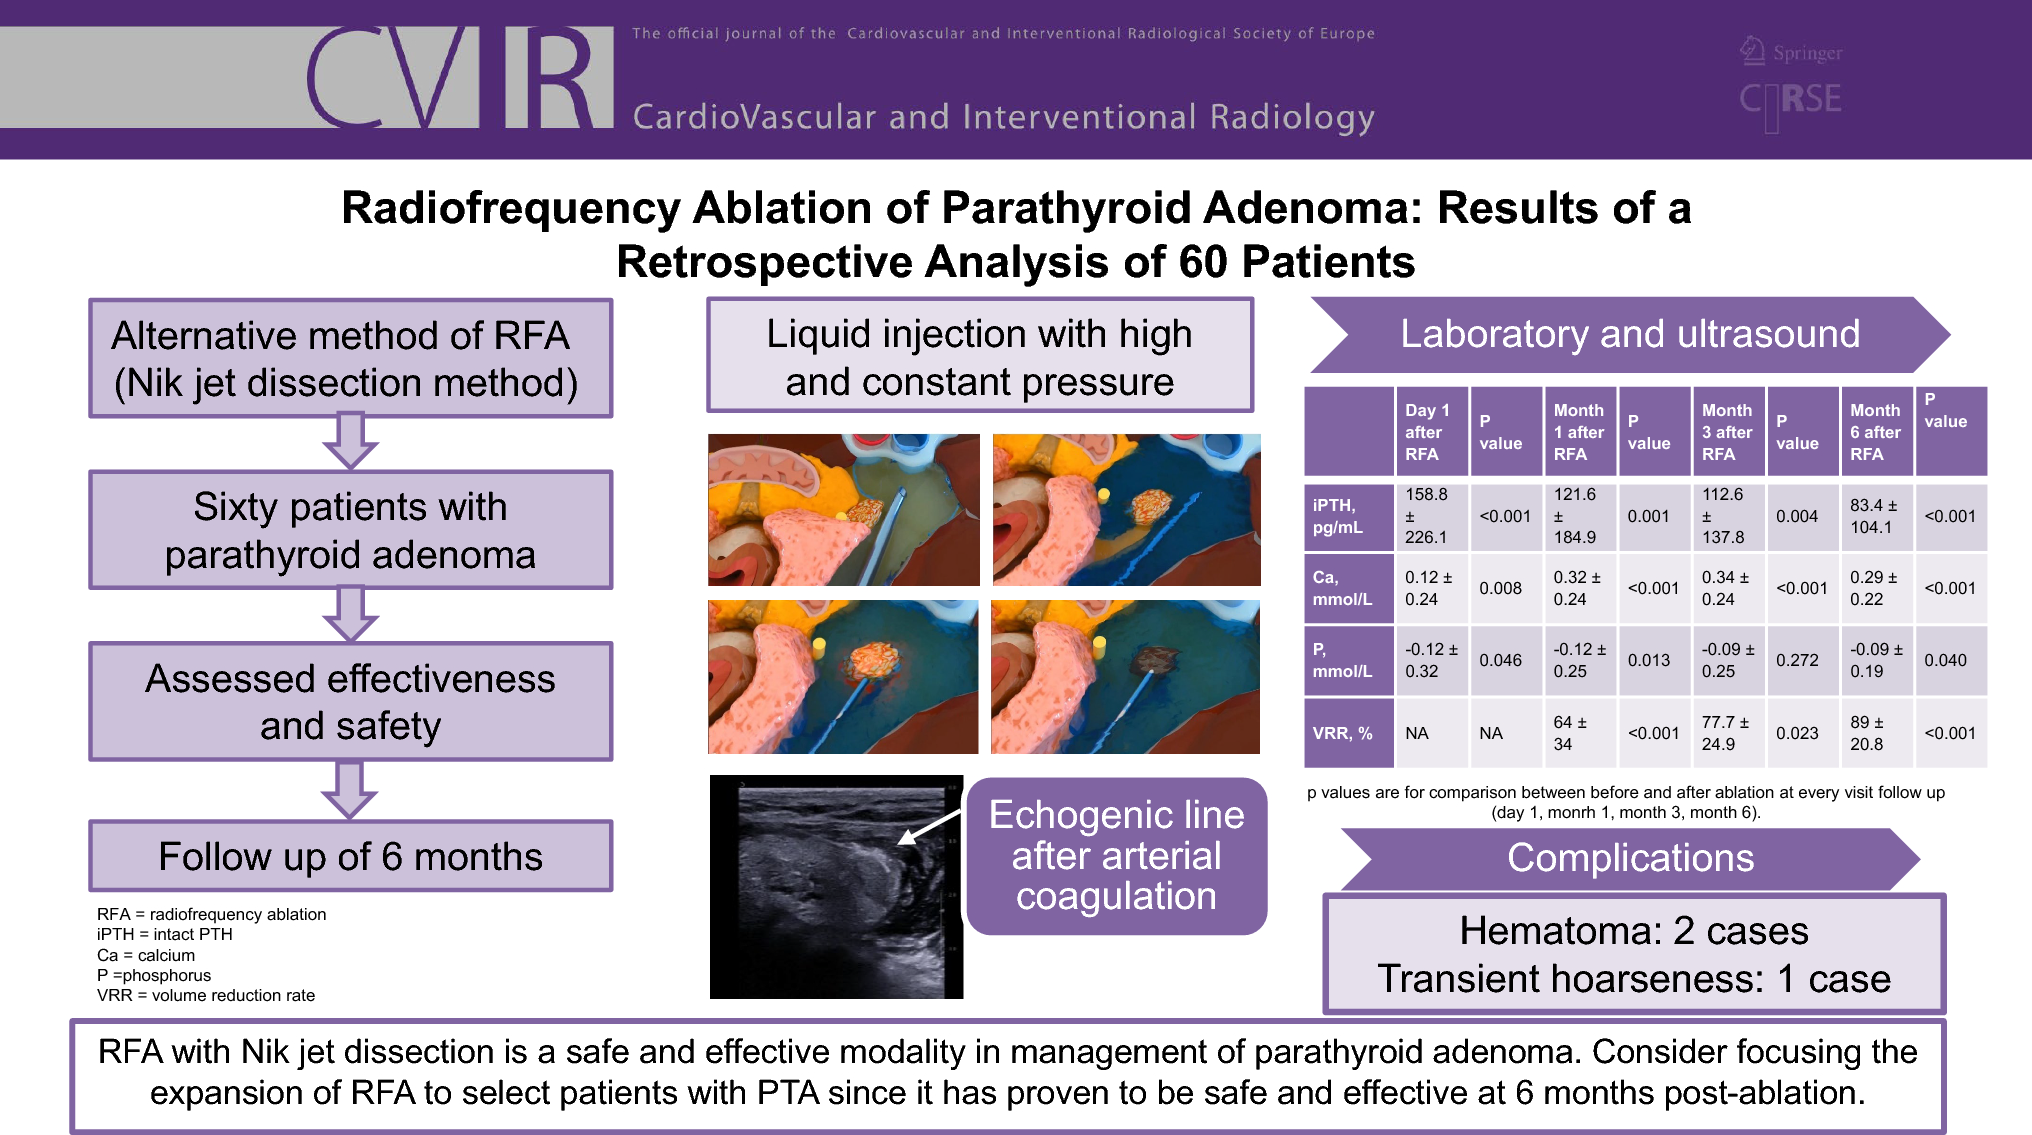 Radiofrequency Ablation of Parathyroid Adenoma: Results of a Retrospective Analysis of 60 Patients